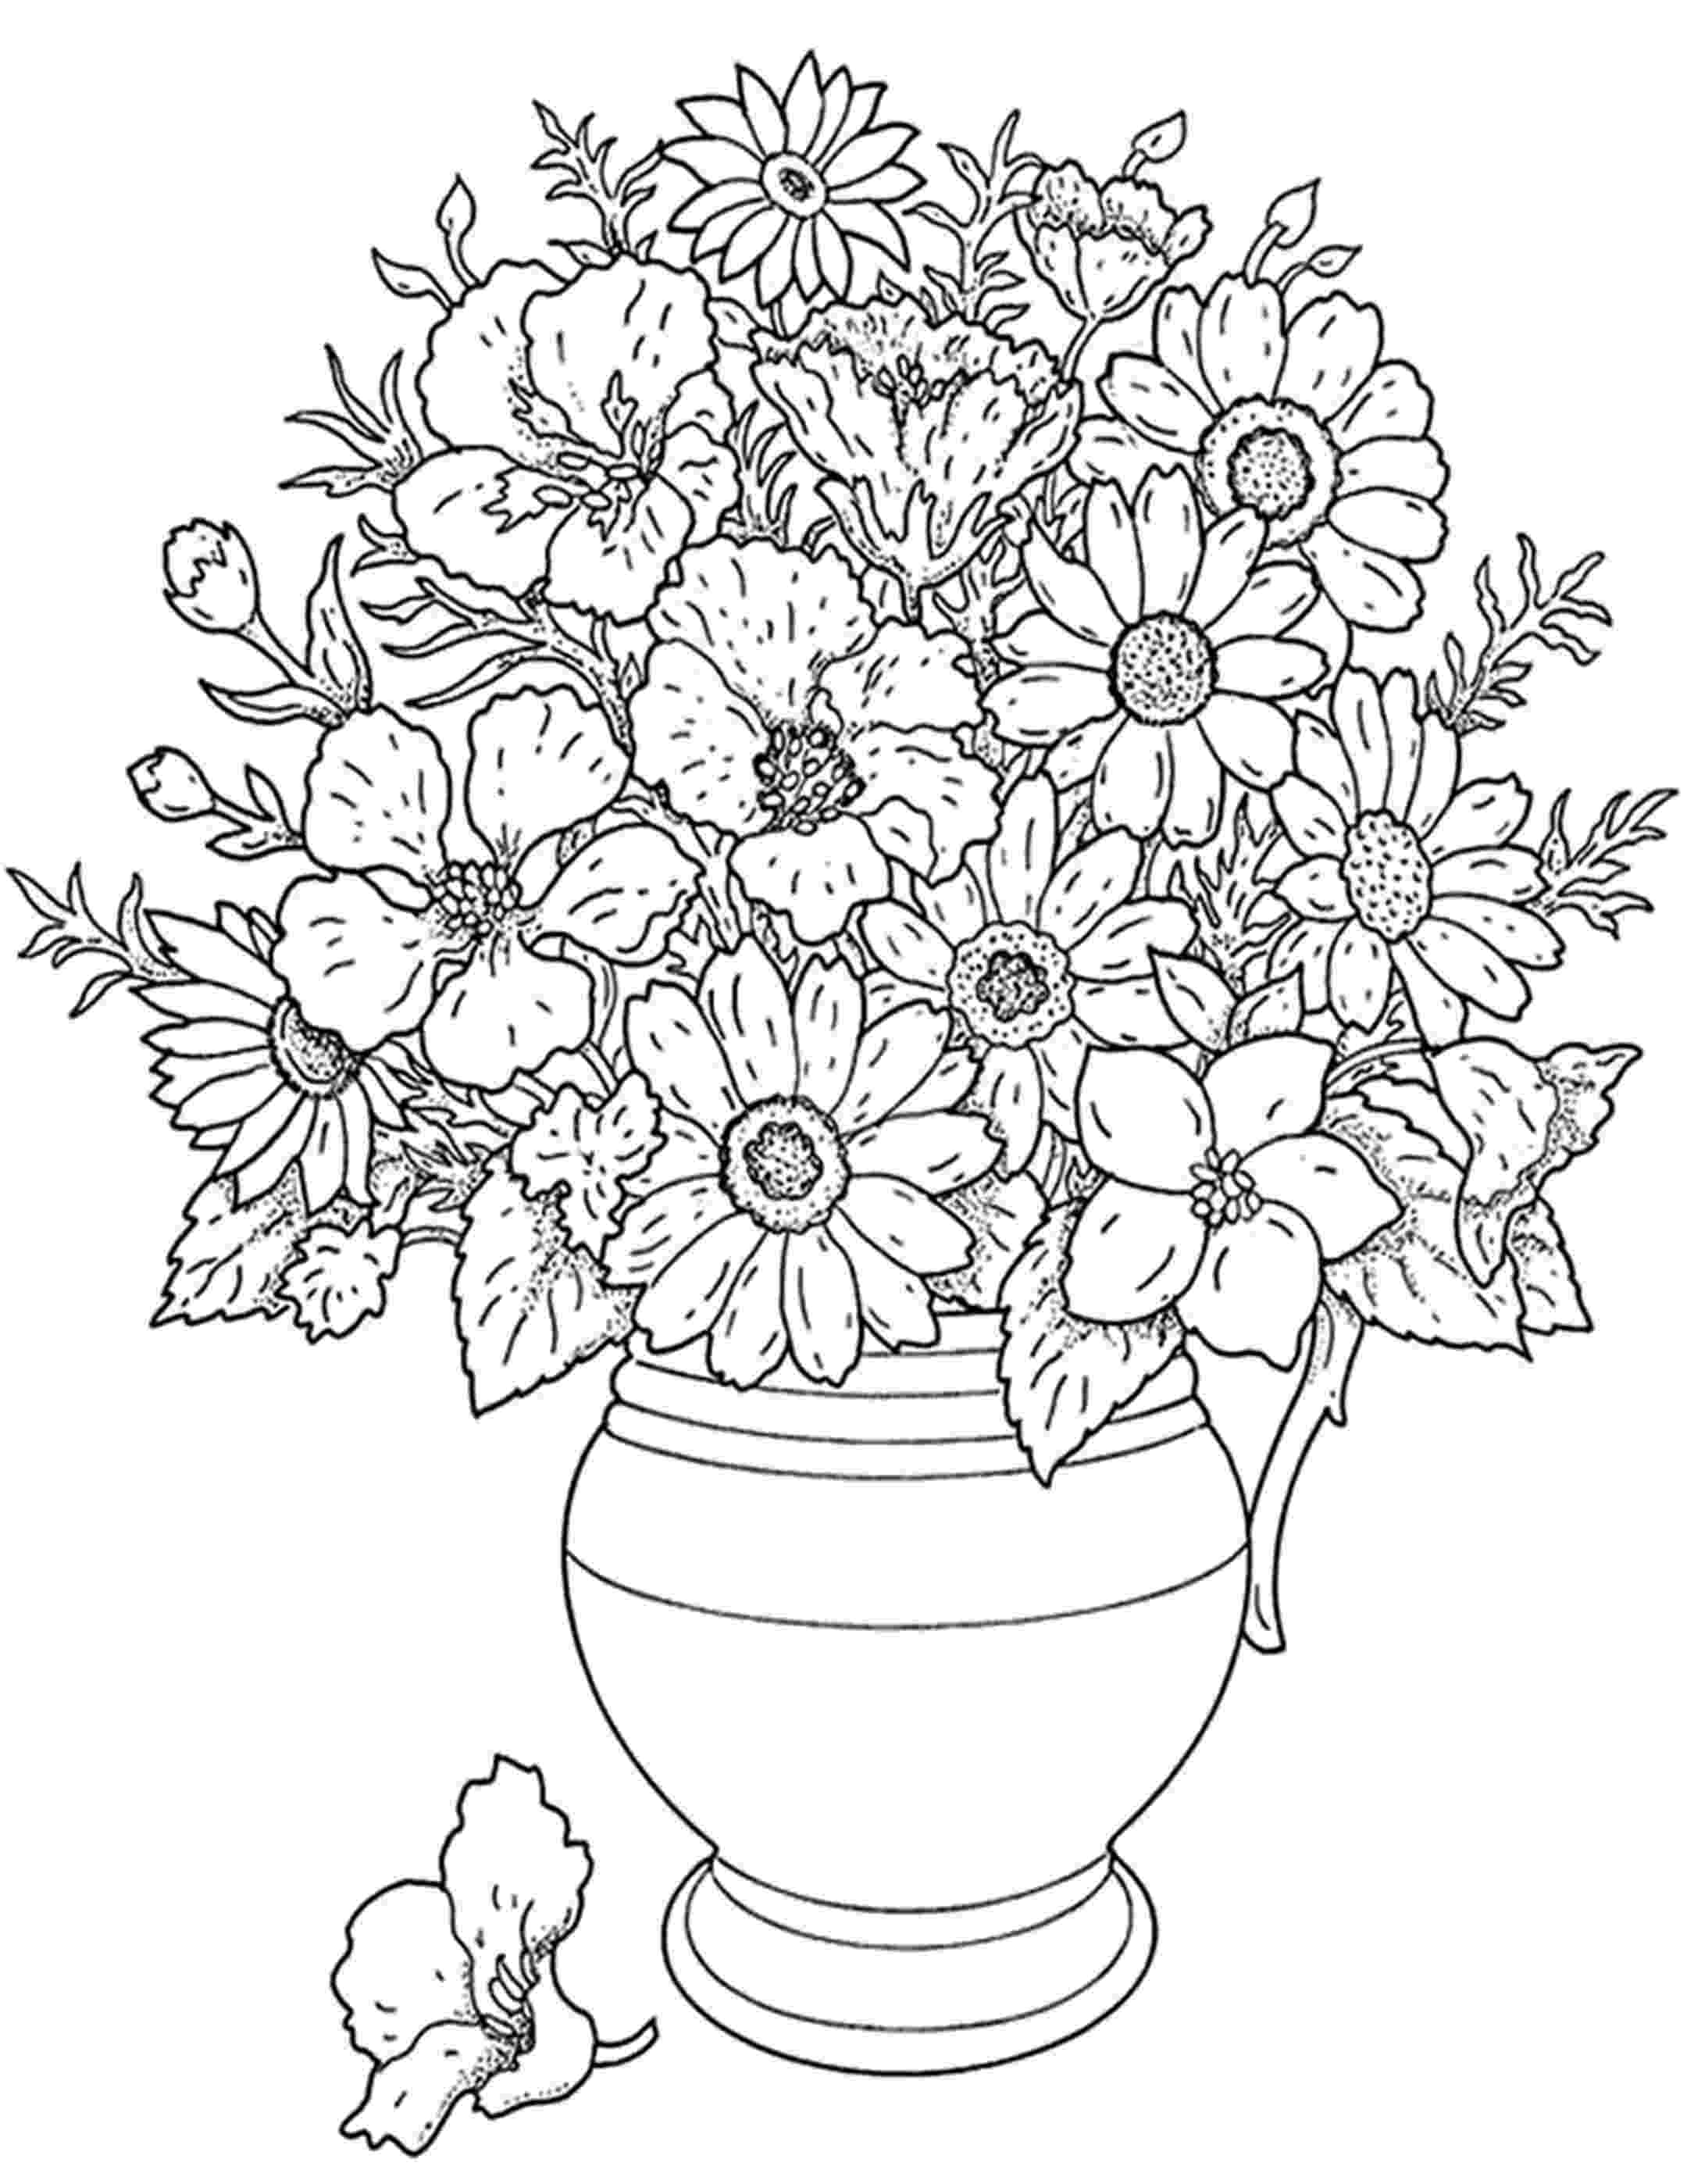 flower printable pictures free printable flower coloring pages for kids best flower printable pictures 1 1